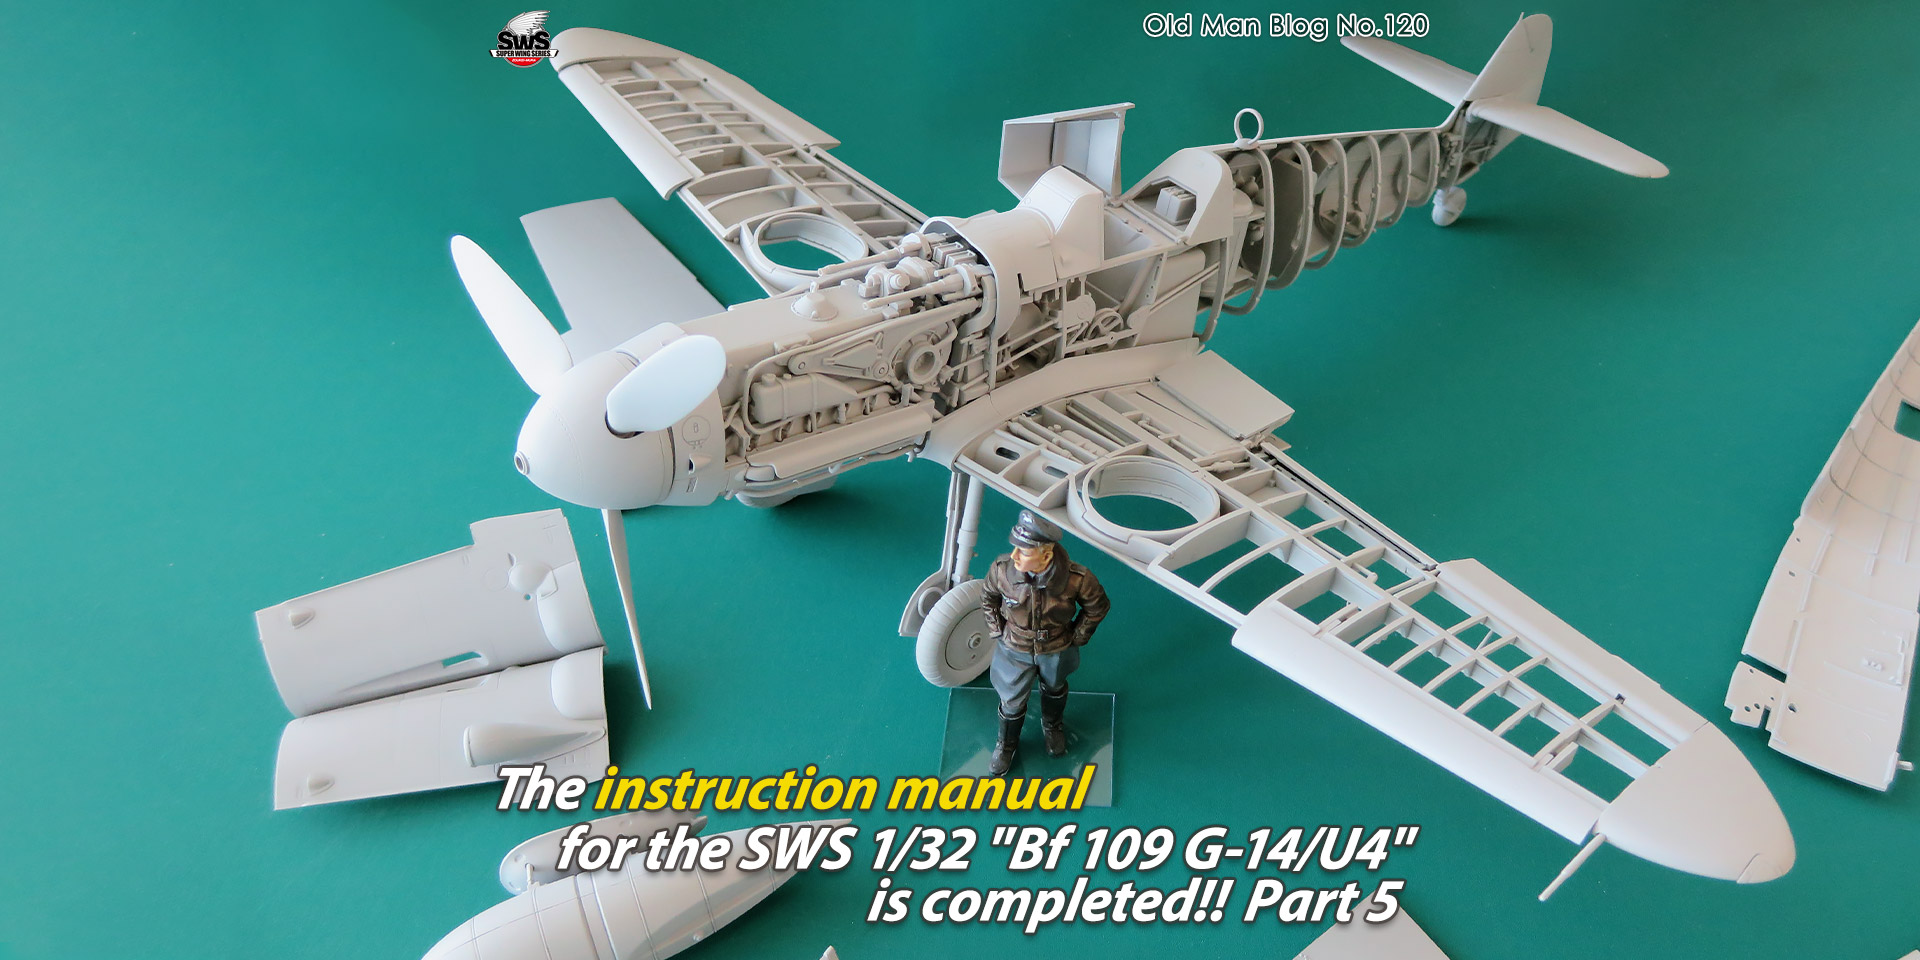 The instruction manual for the SWS 1/32 Bf 109 G-14/U14 is completed!! Part 5